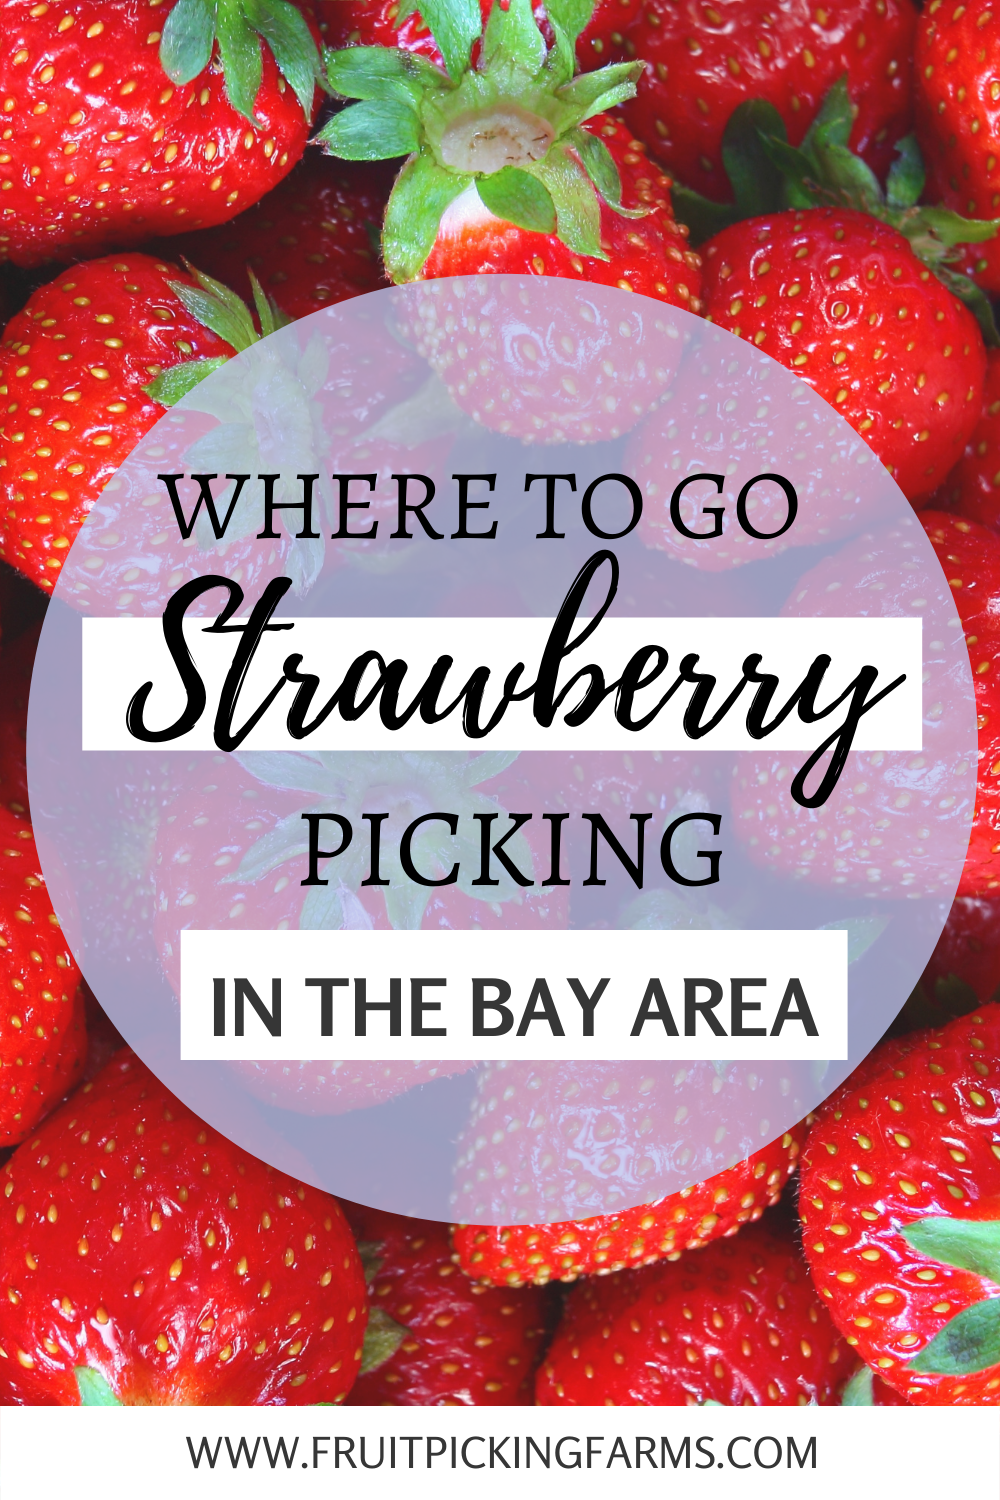 Strawberry Picking in the Bay Area